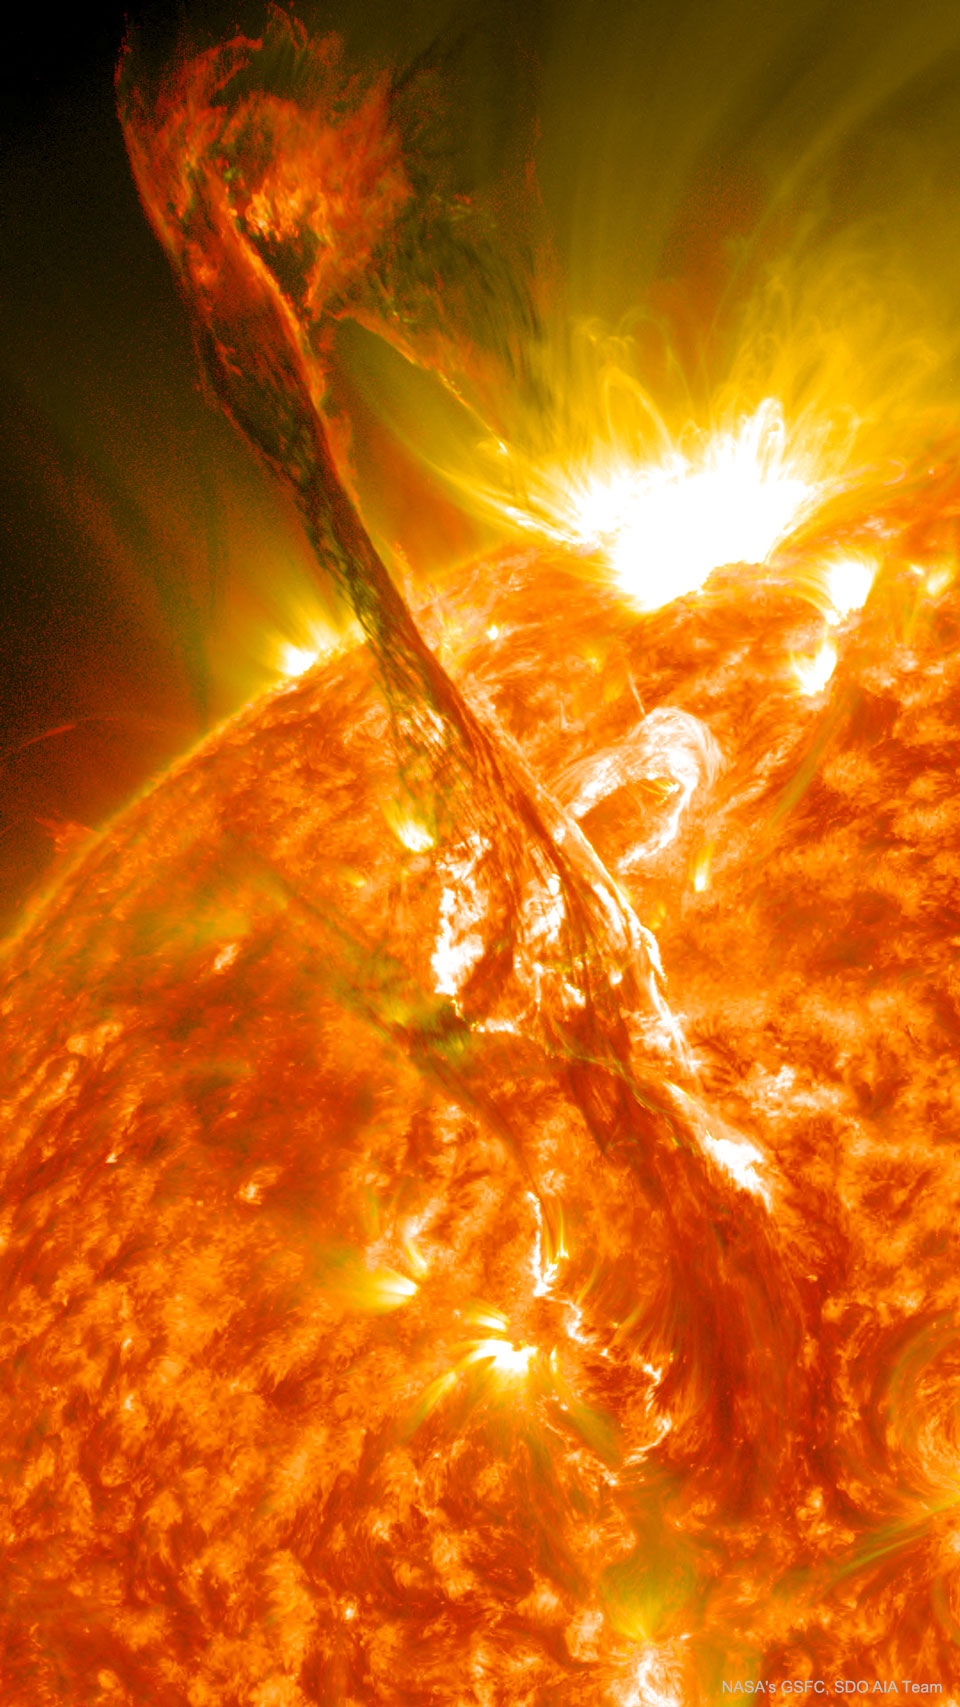 A large filament on the upper left is seen lifting 
away from the Sun, pictured on the lower right.
Please see the explanation for more detailed information.